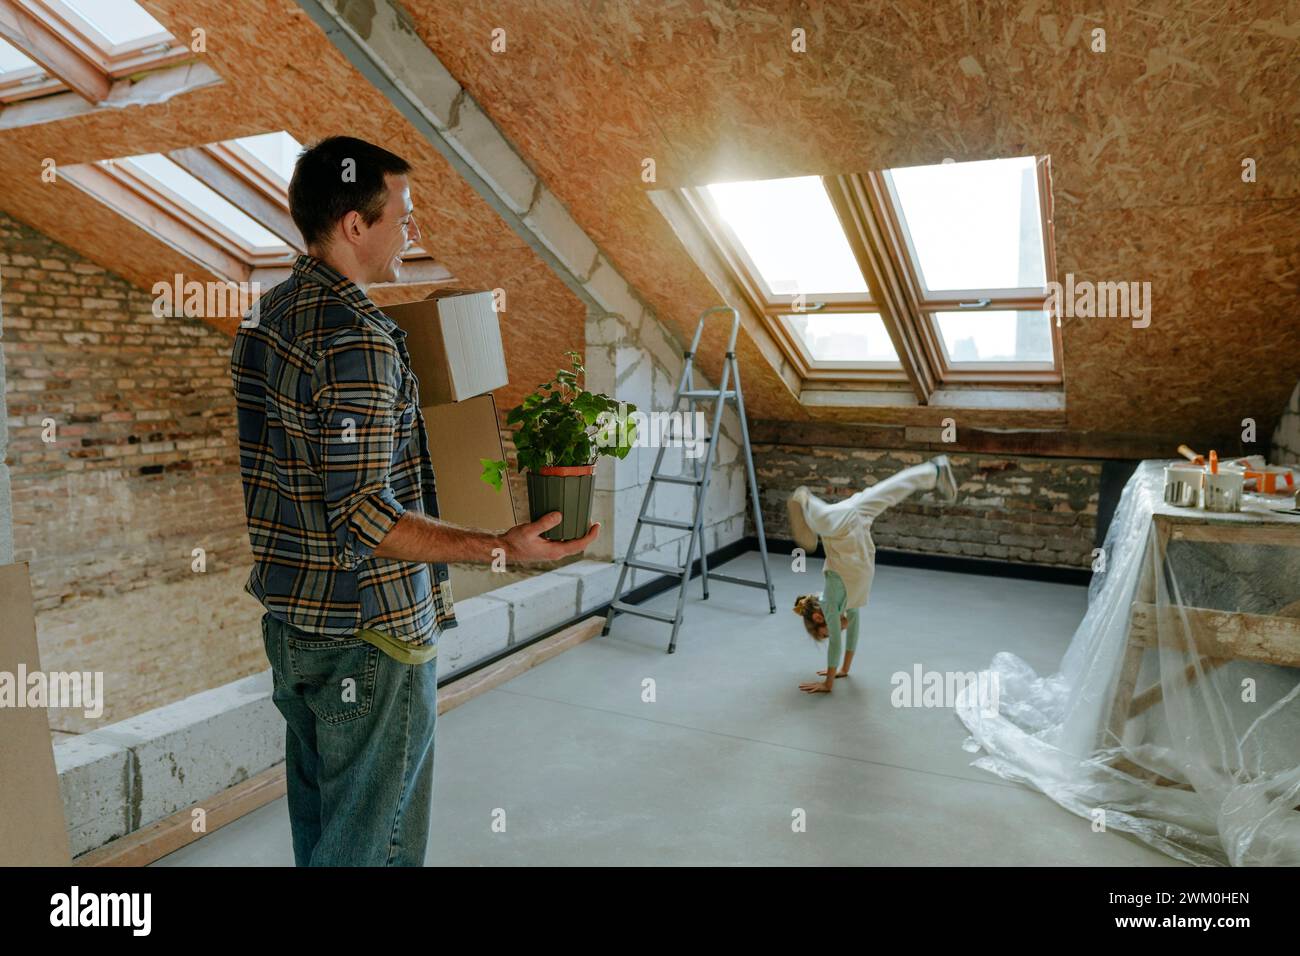 Father looking at daughter doing cartwheel in room under renovation Stock Photo